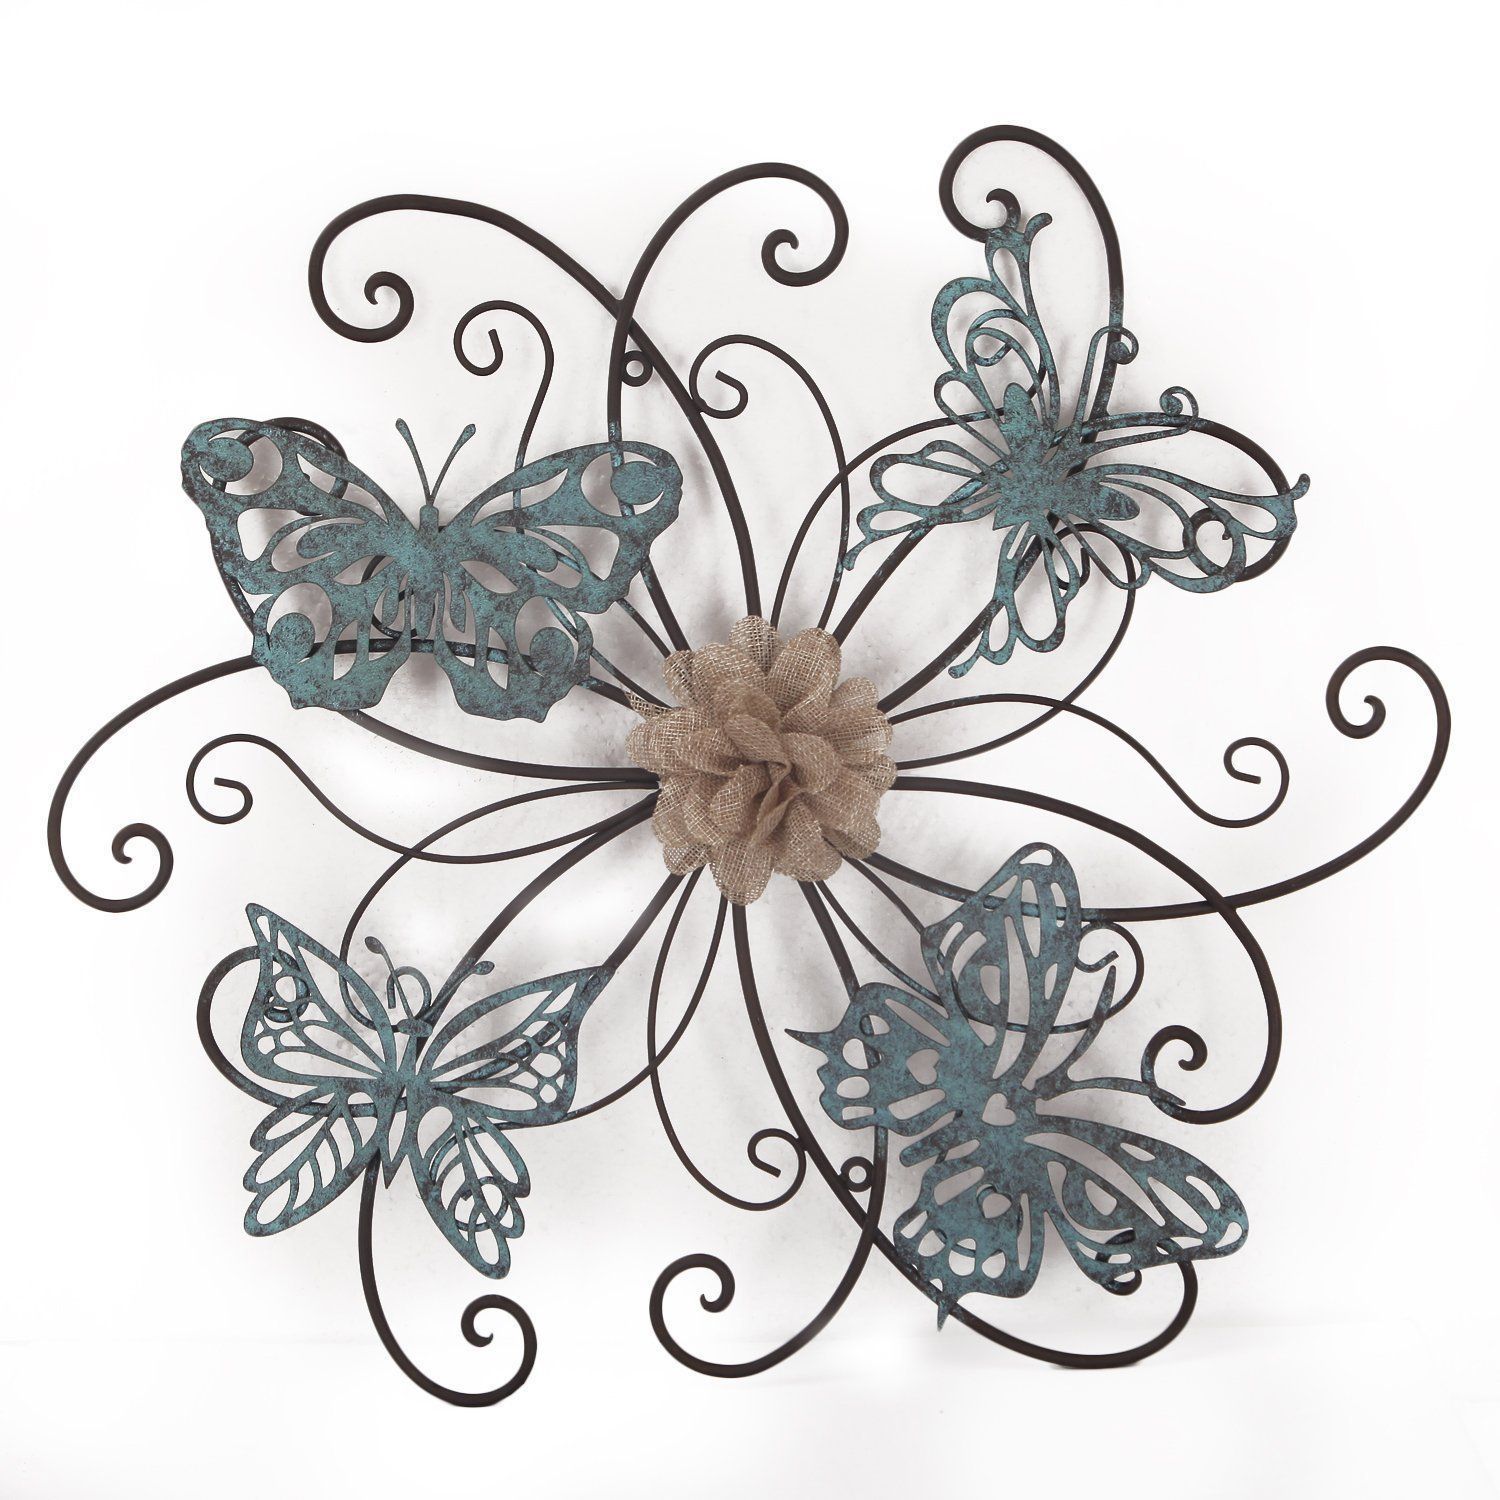 Adeco Flower And Butterfly Urban Design Metal Wall Decor For In Flower Urban Design Metal Wall Decor (Photo 1 of 30)